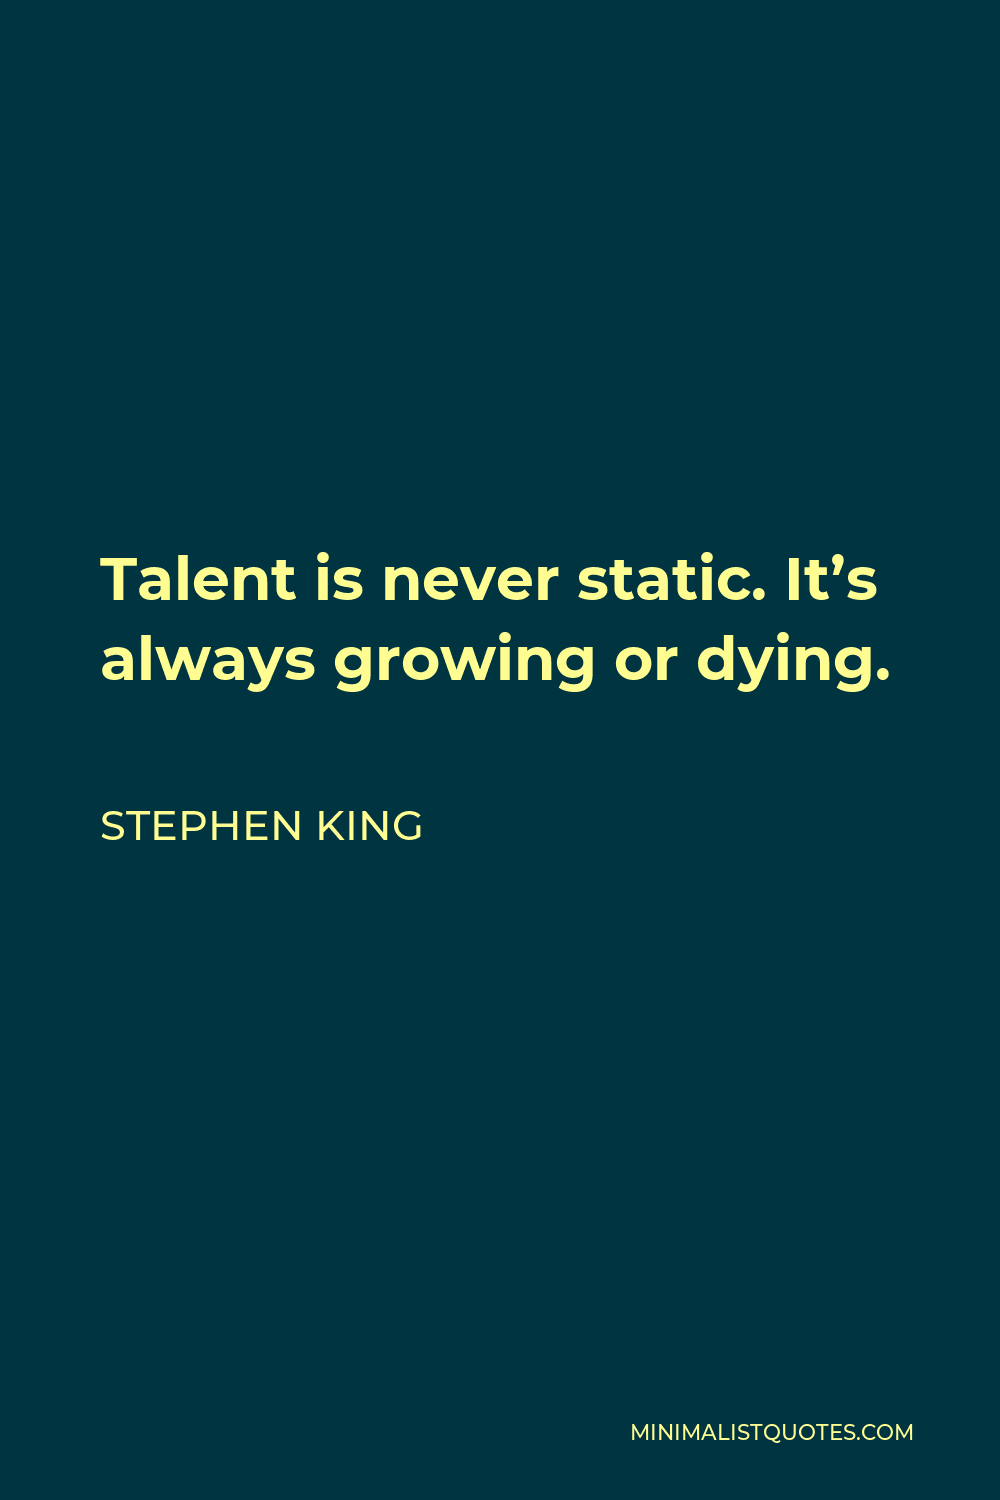 Stephen King Quote - Talent is never static. It’s always growing or dying.